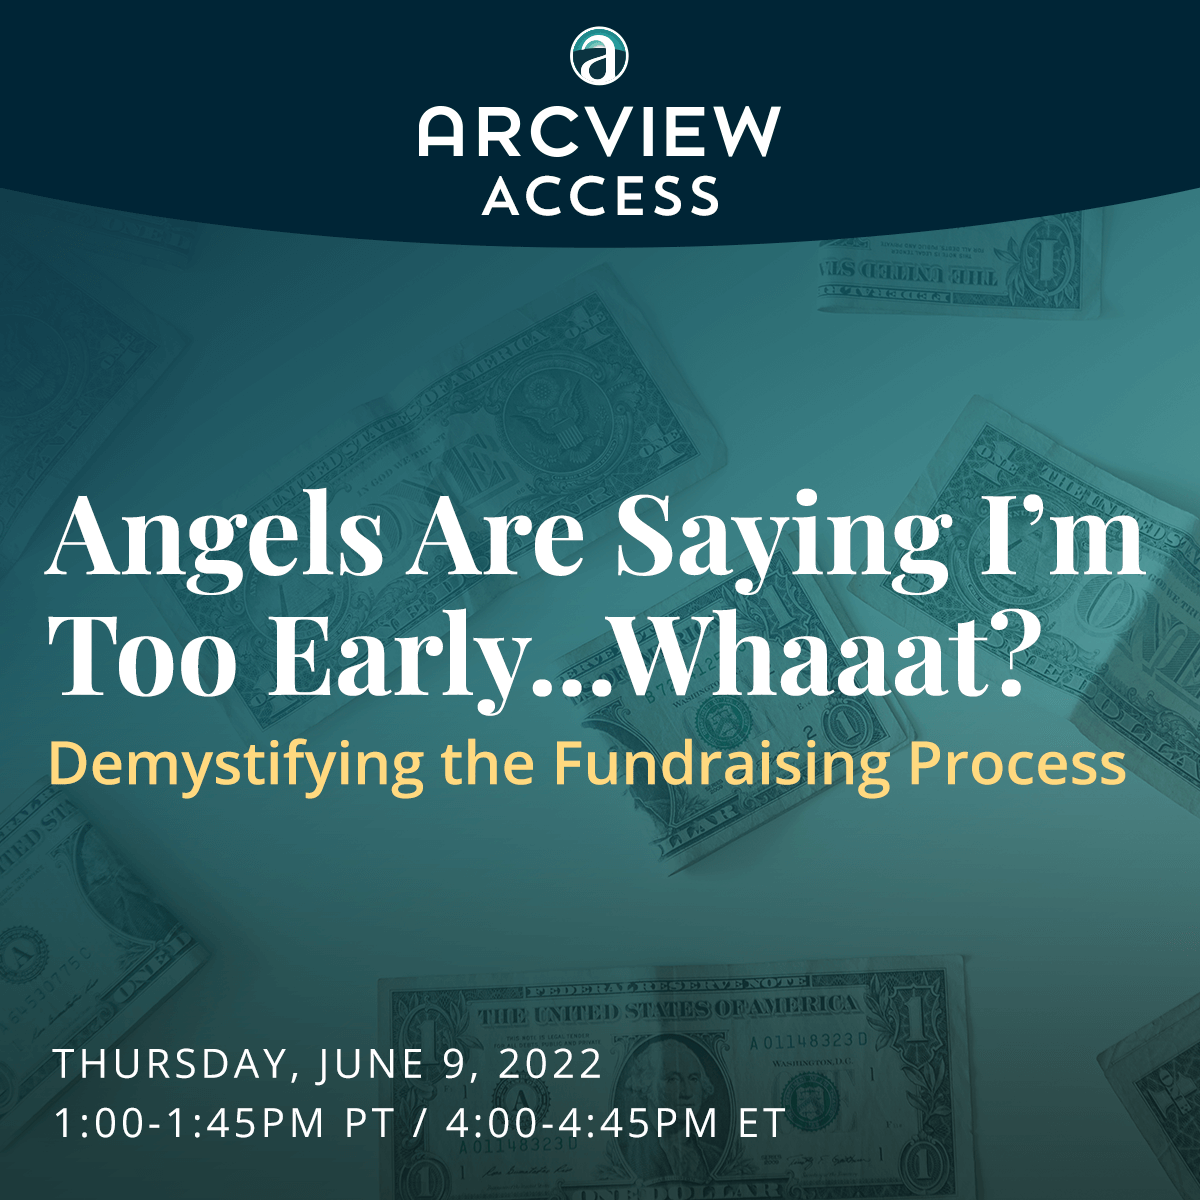 Arcview Access: Demystifying the Fundraising Process